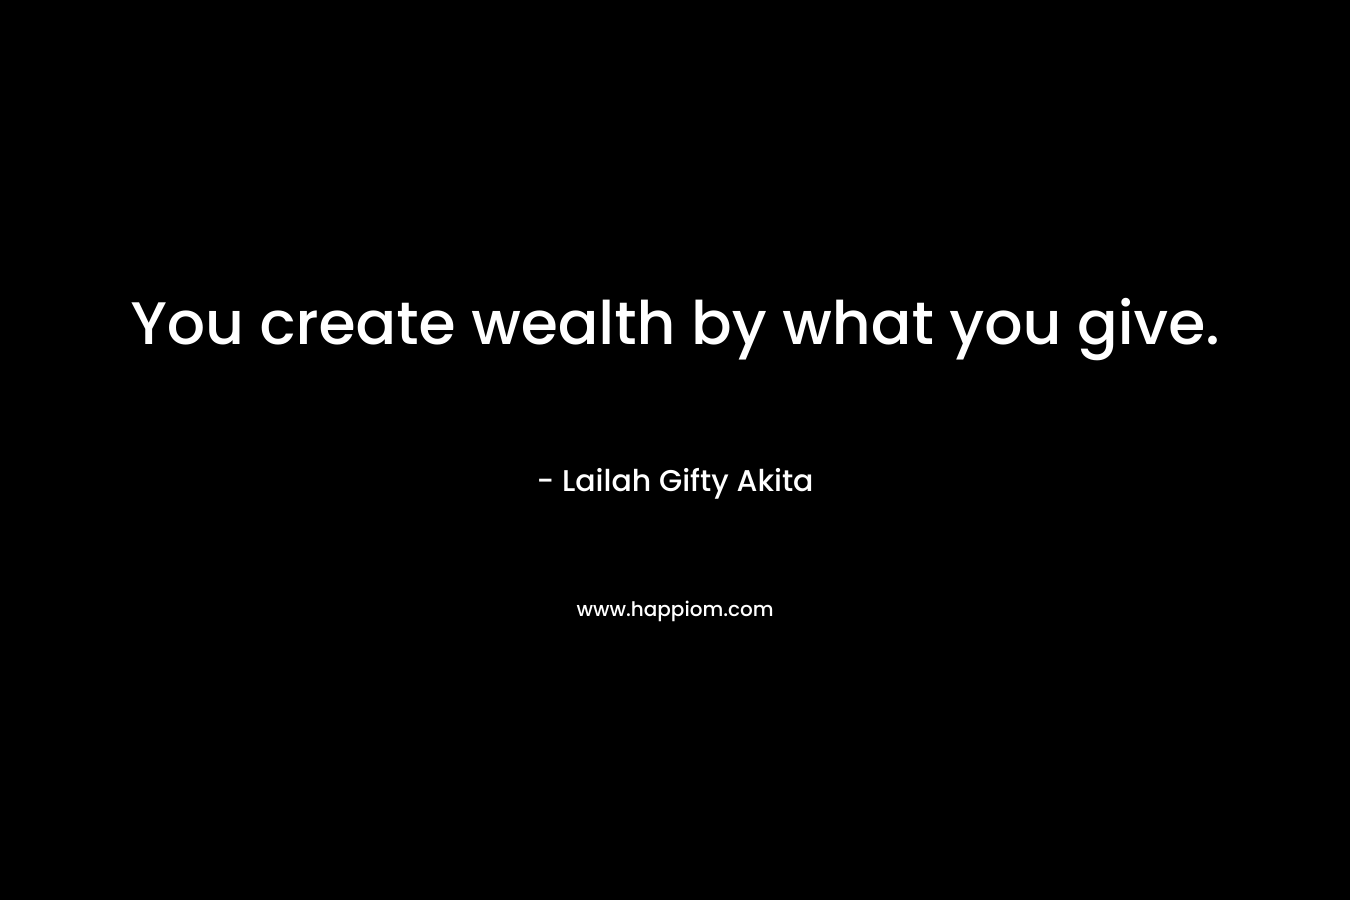 You create wealth by what you give.